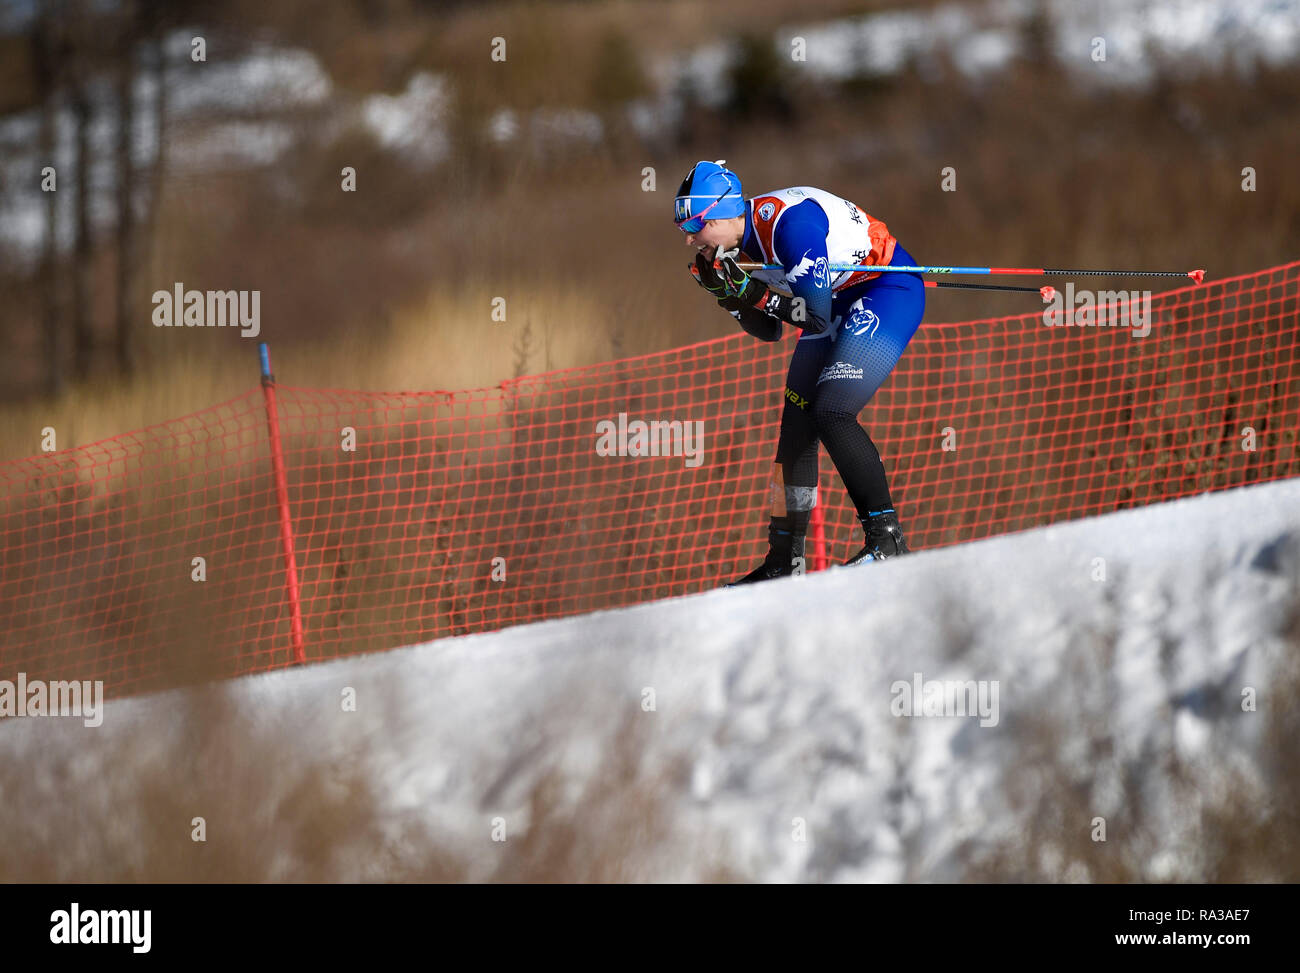 (190101) -- FU SONG, Jan. 1, 2019 (Xinhua) -- Marina Chernousova of Russia competes during the first stage of 2019 Tour de Ski China in fusong, northeast China's Jilin Province, Jan. 1, 2019. Credit: Xinhua/Alamy Live News Stock Photo